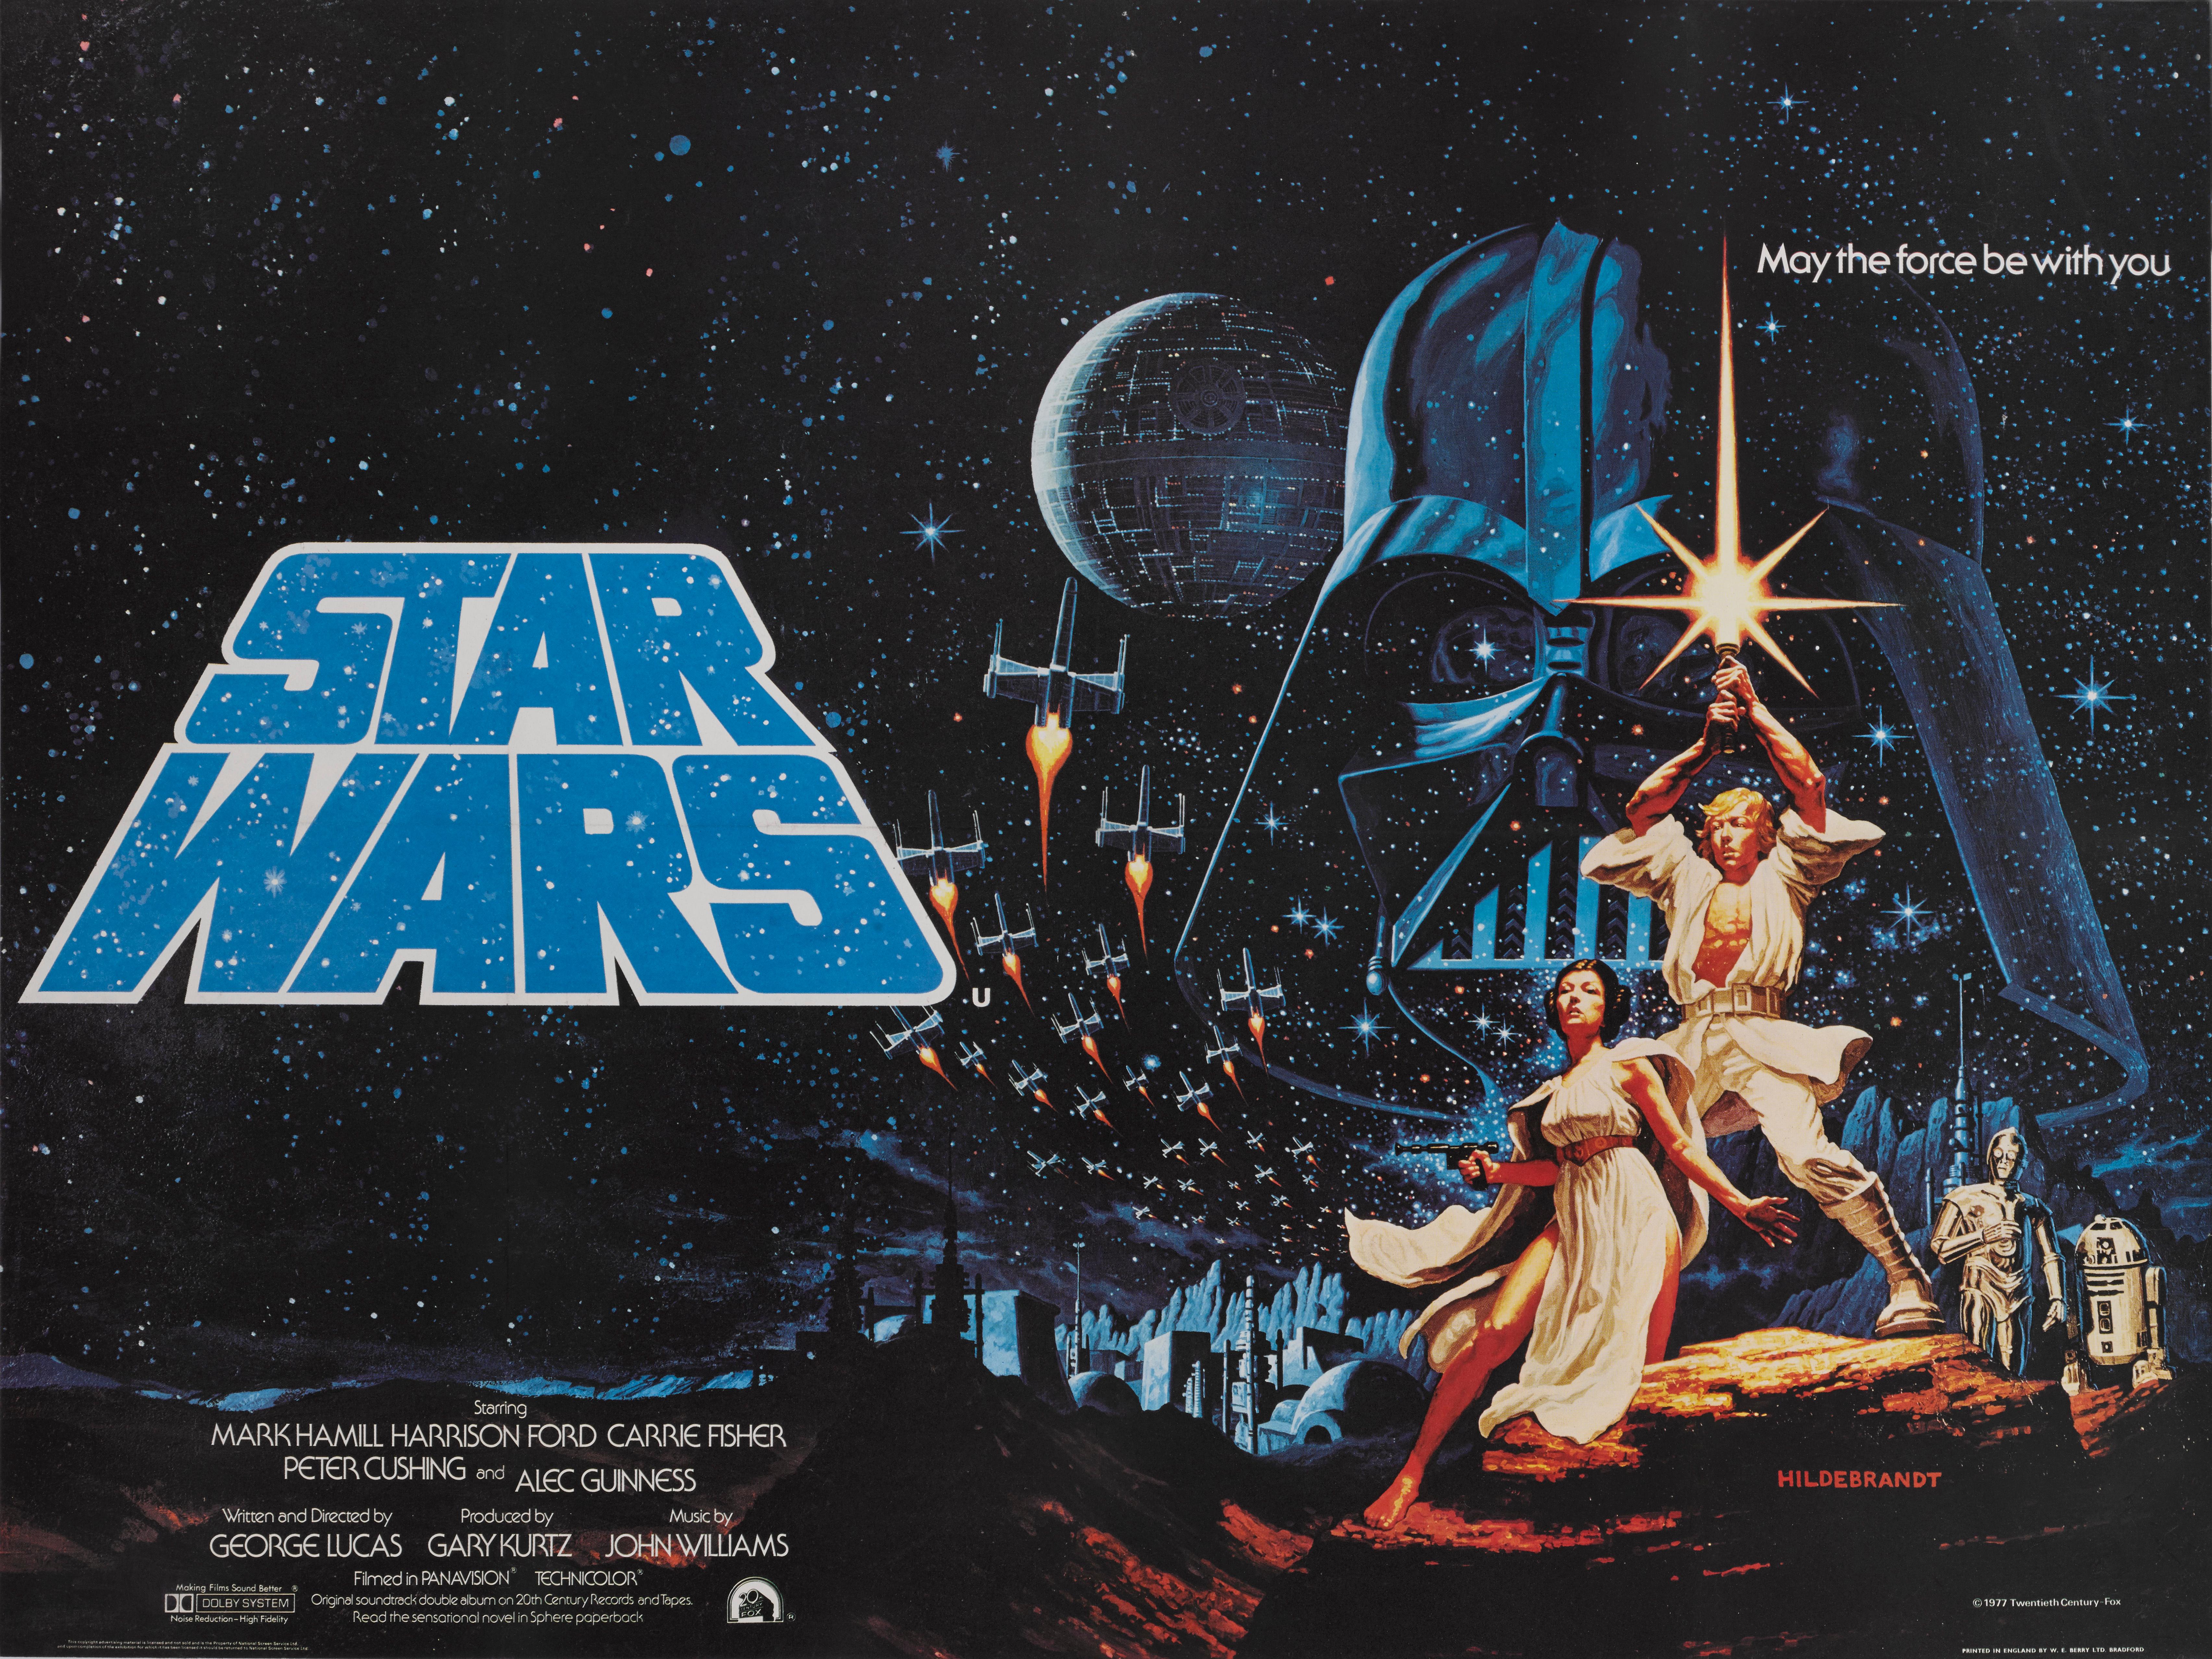 Original British film posters for Star Wars 1977.
The film was directed by George Lucas and starred Mark Hamill, Harrison Ford, Carrie Fisher.
This Hildebrandt Brothers poster is one of the rarer British posters on this title, as far fewer of this